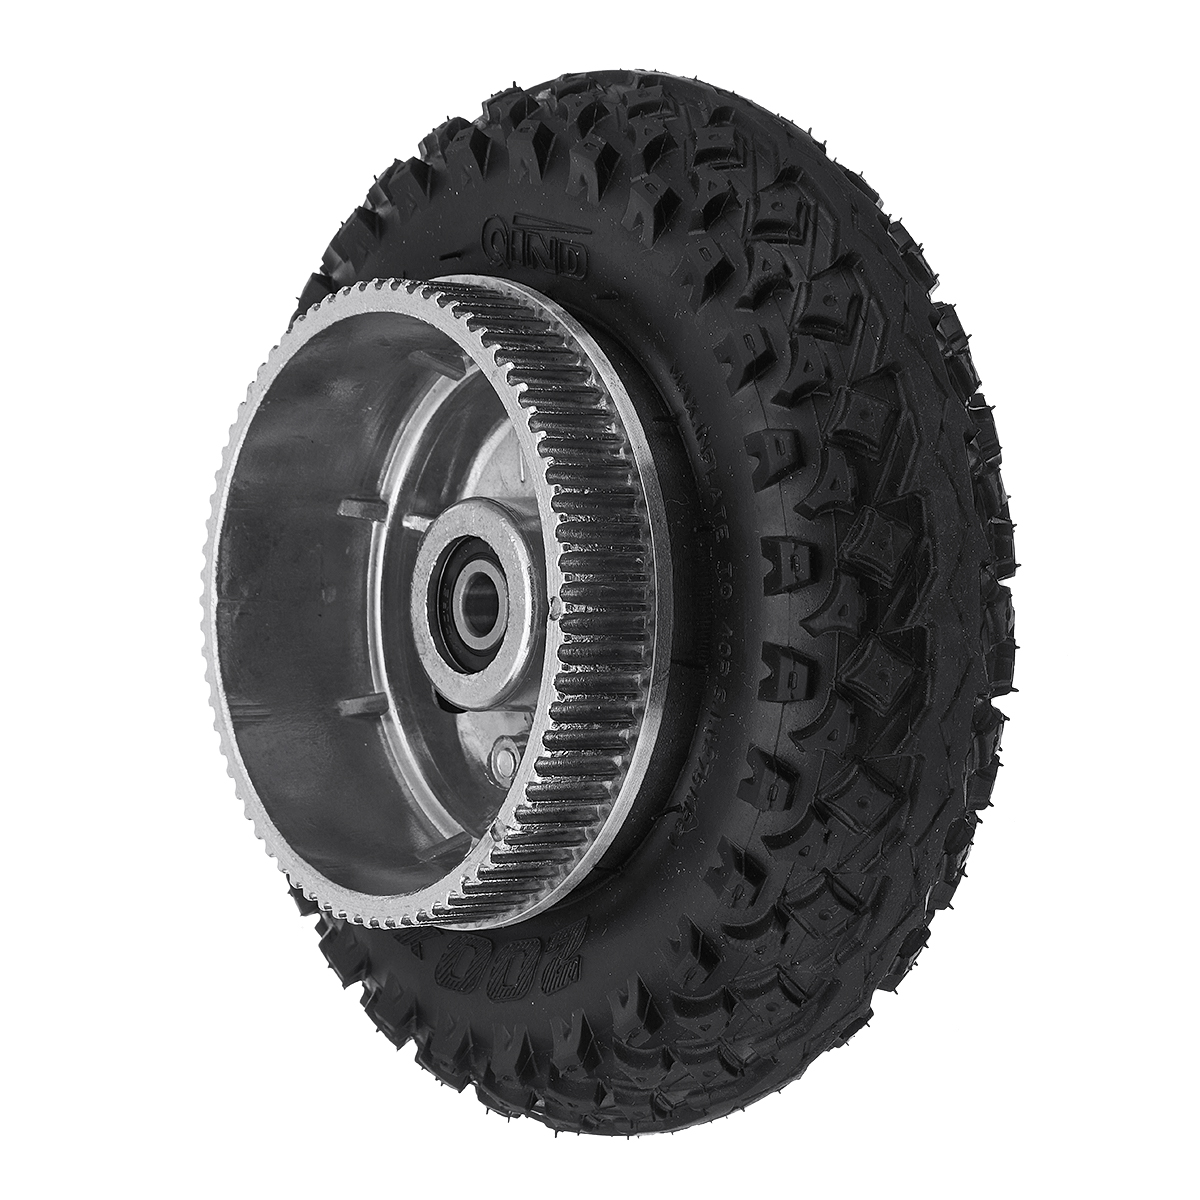 200*50Mm Inflatable Longboard off Road Gears Wheel for Electrical Skateboard - Auto GoShop